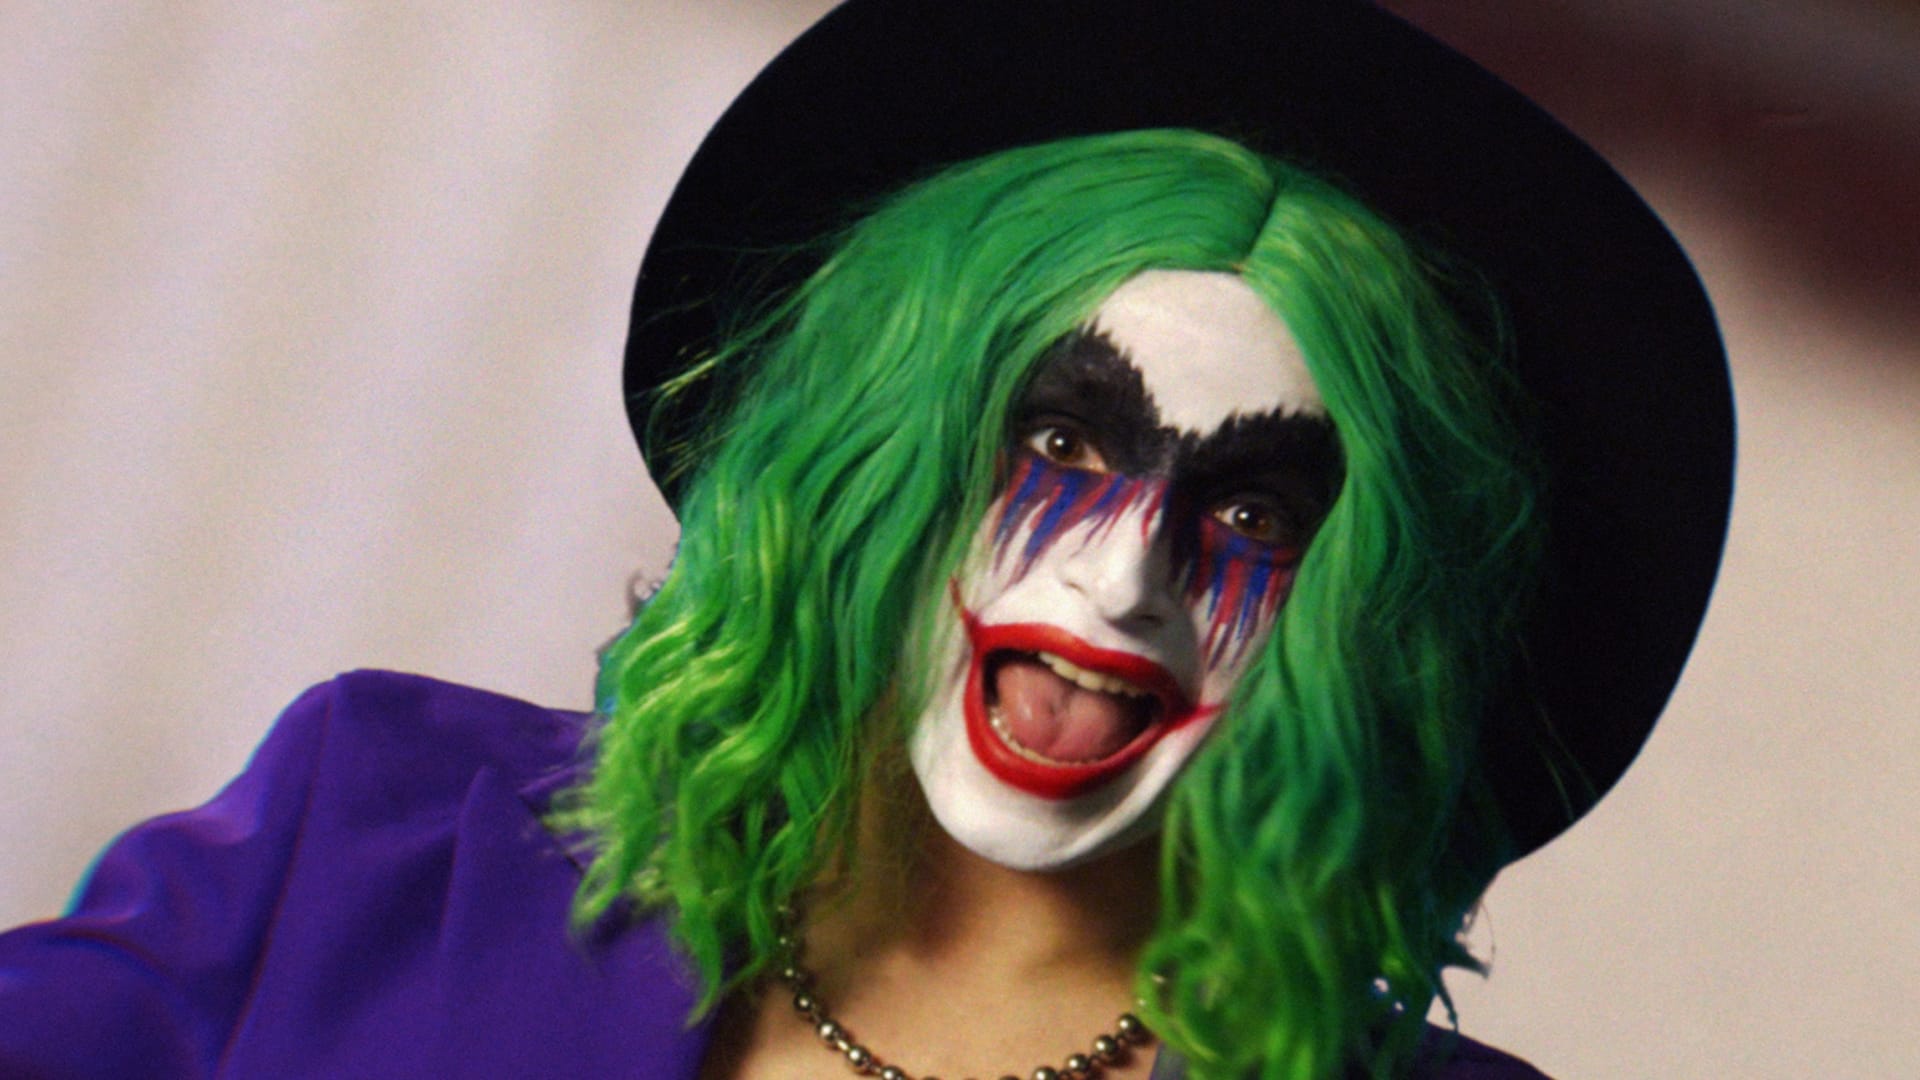 woman with green hair and joker clown make up smiling wide while staring at the camera